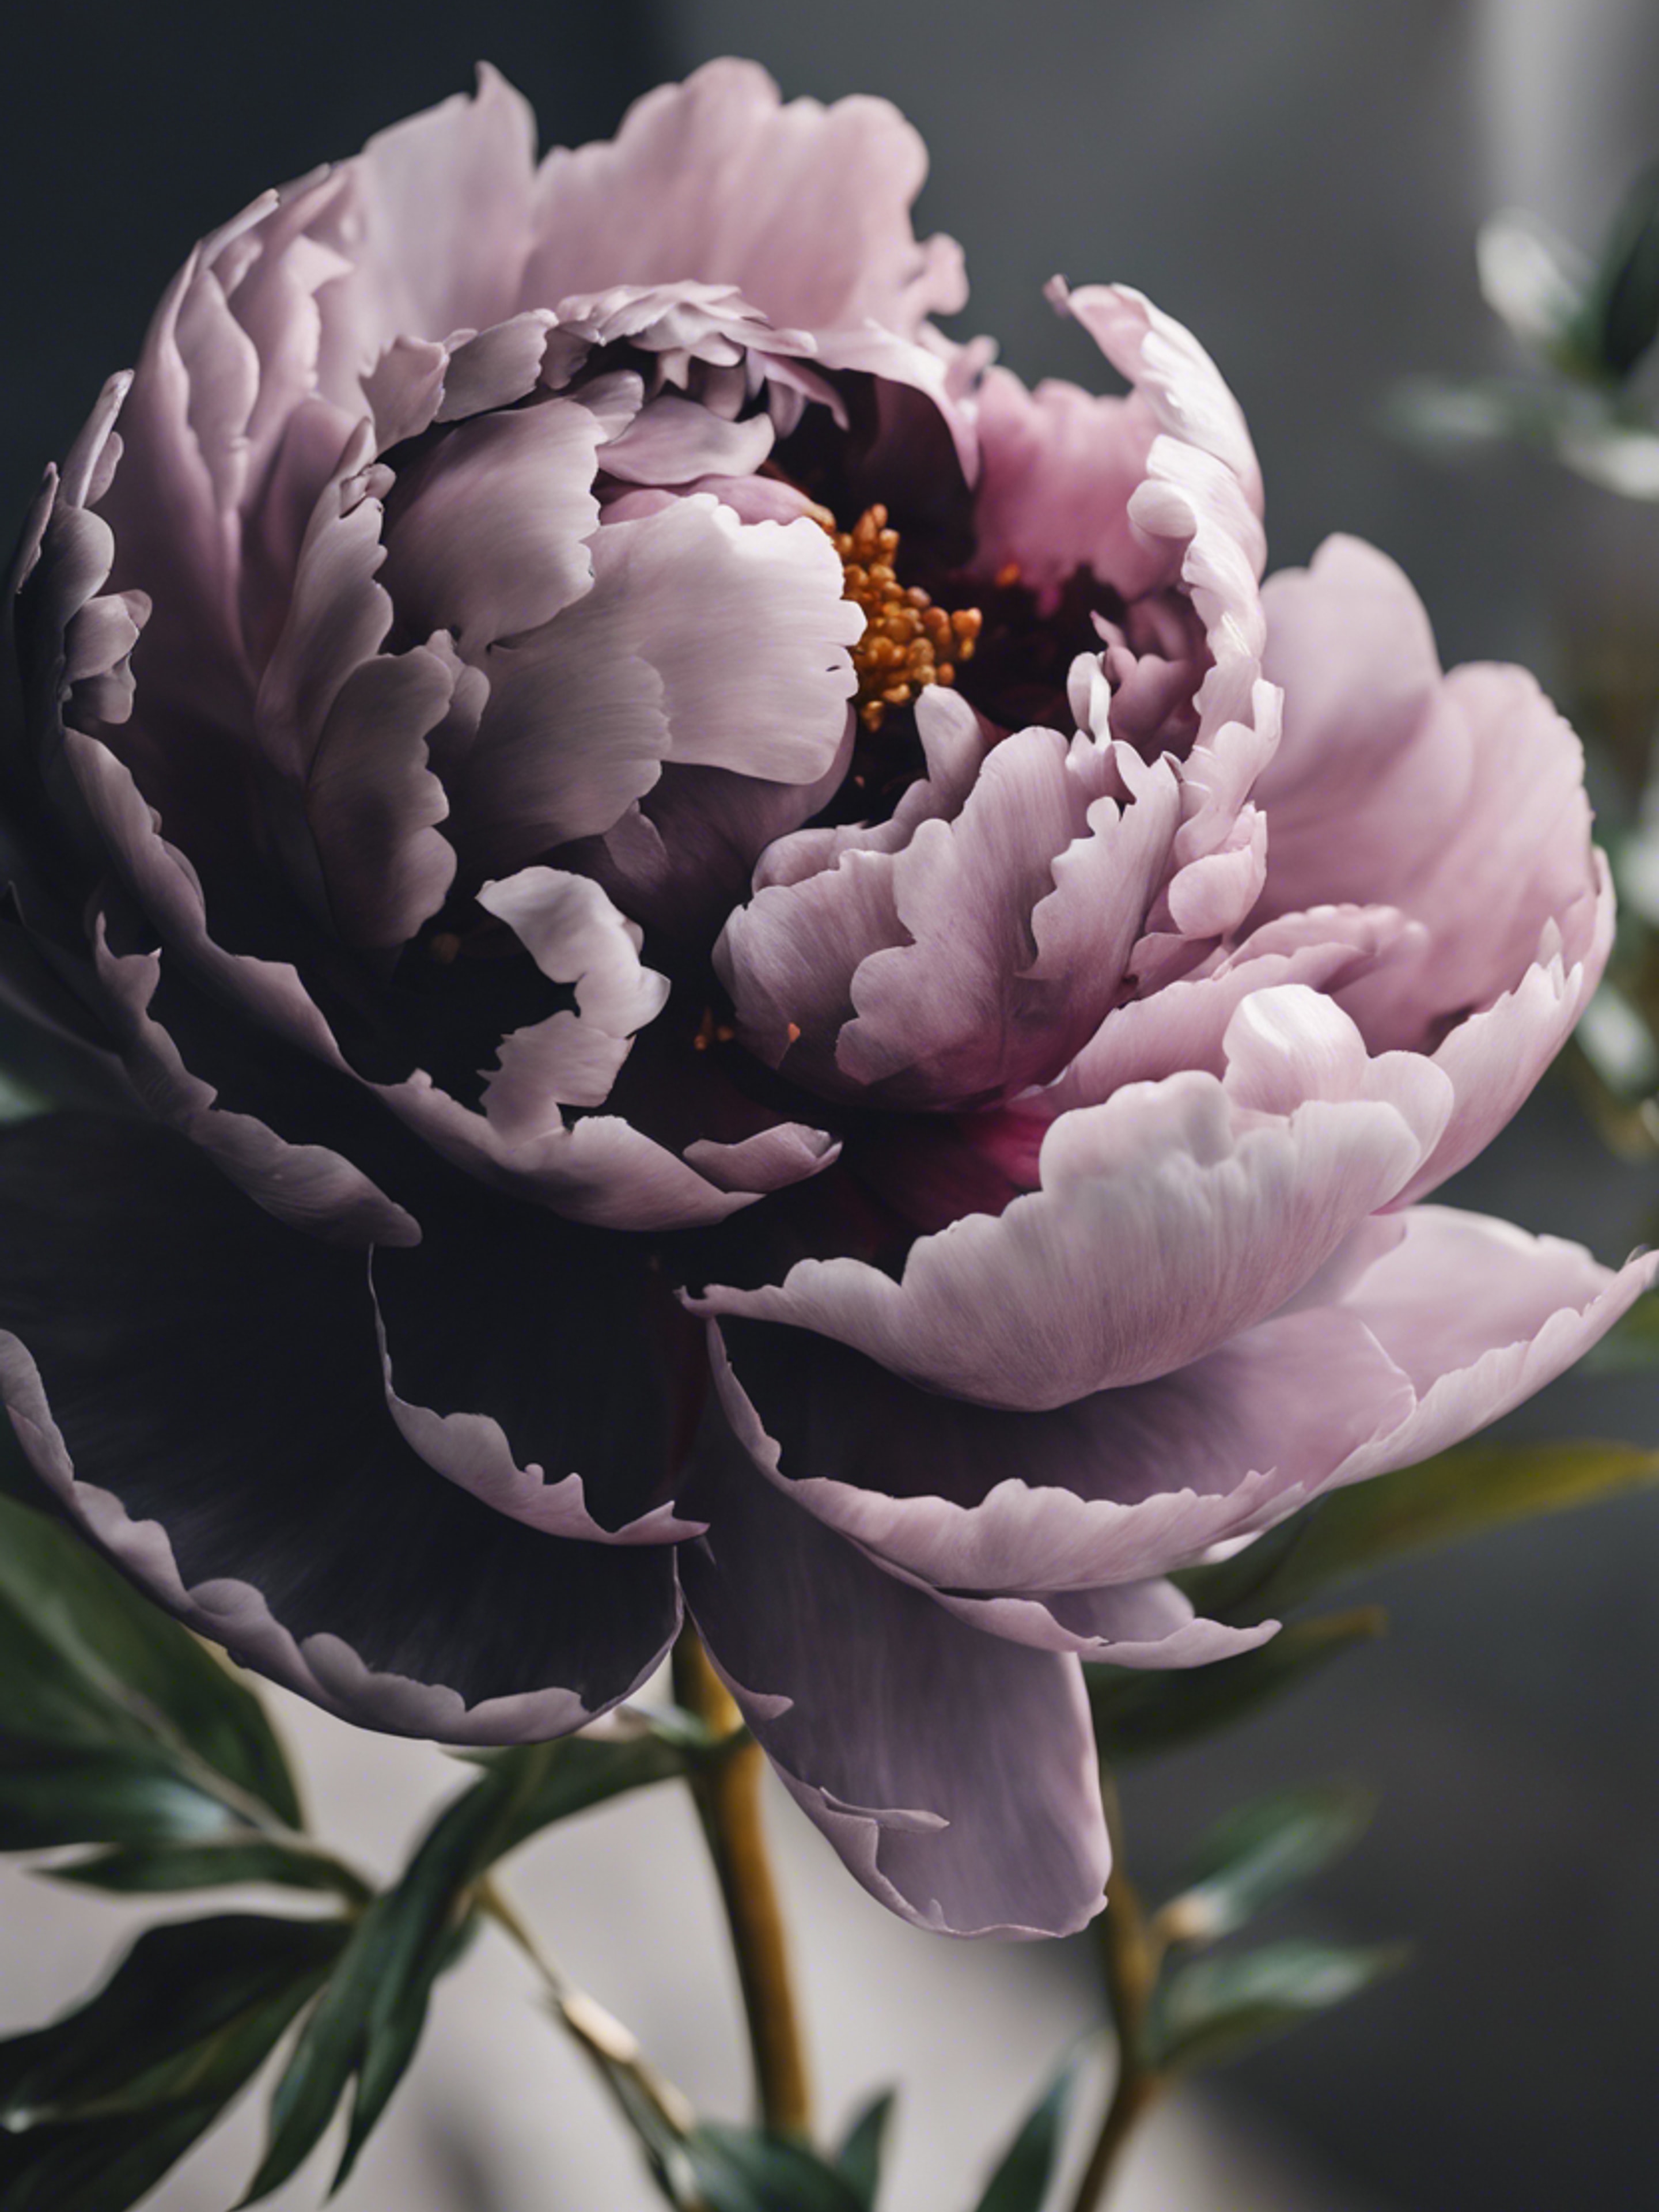 A black peony, the symbol of prosperity and honor, complementing a traditional Asian painting. Kertas dinding[2c78f74174874eadaf7e]